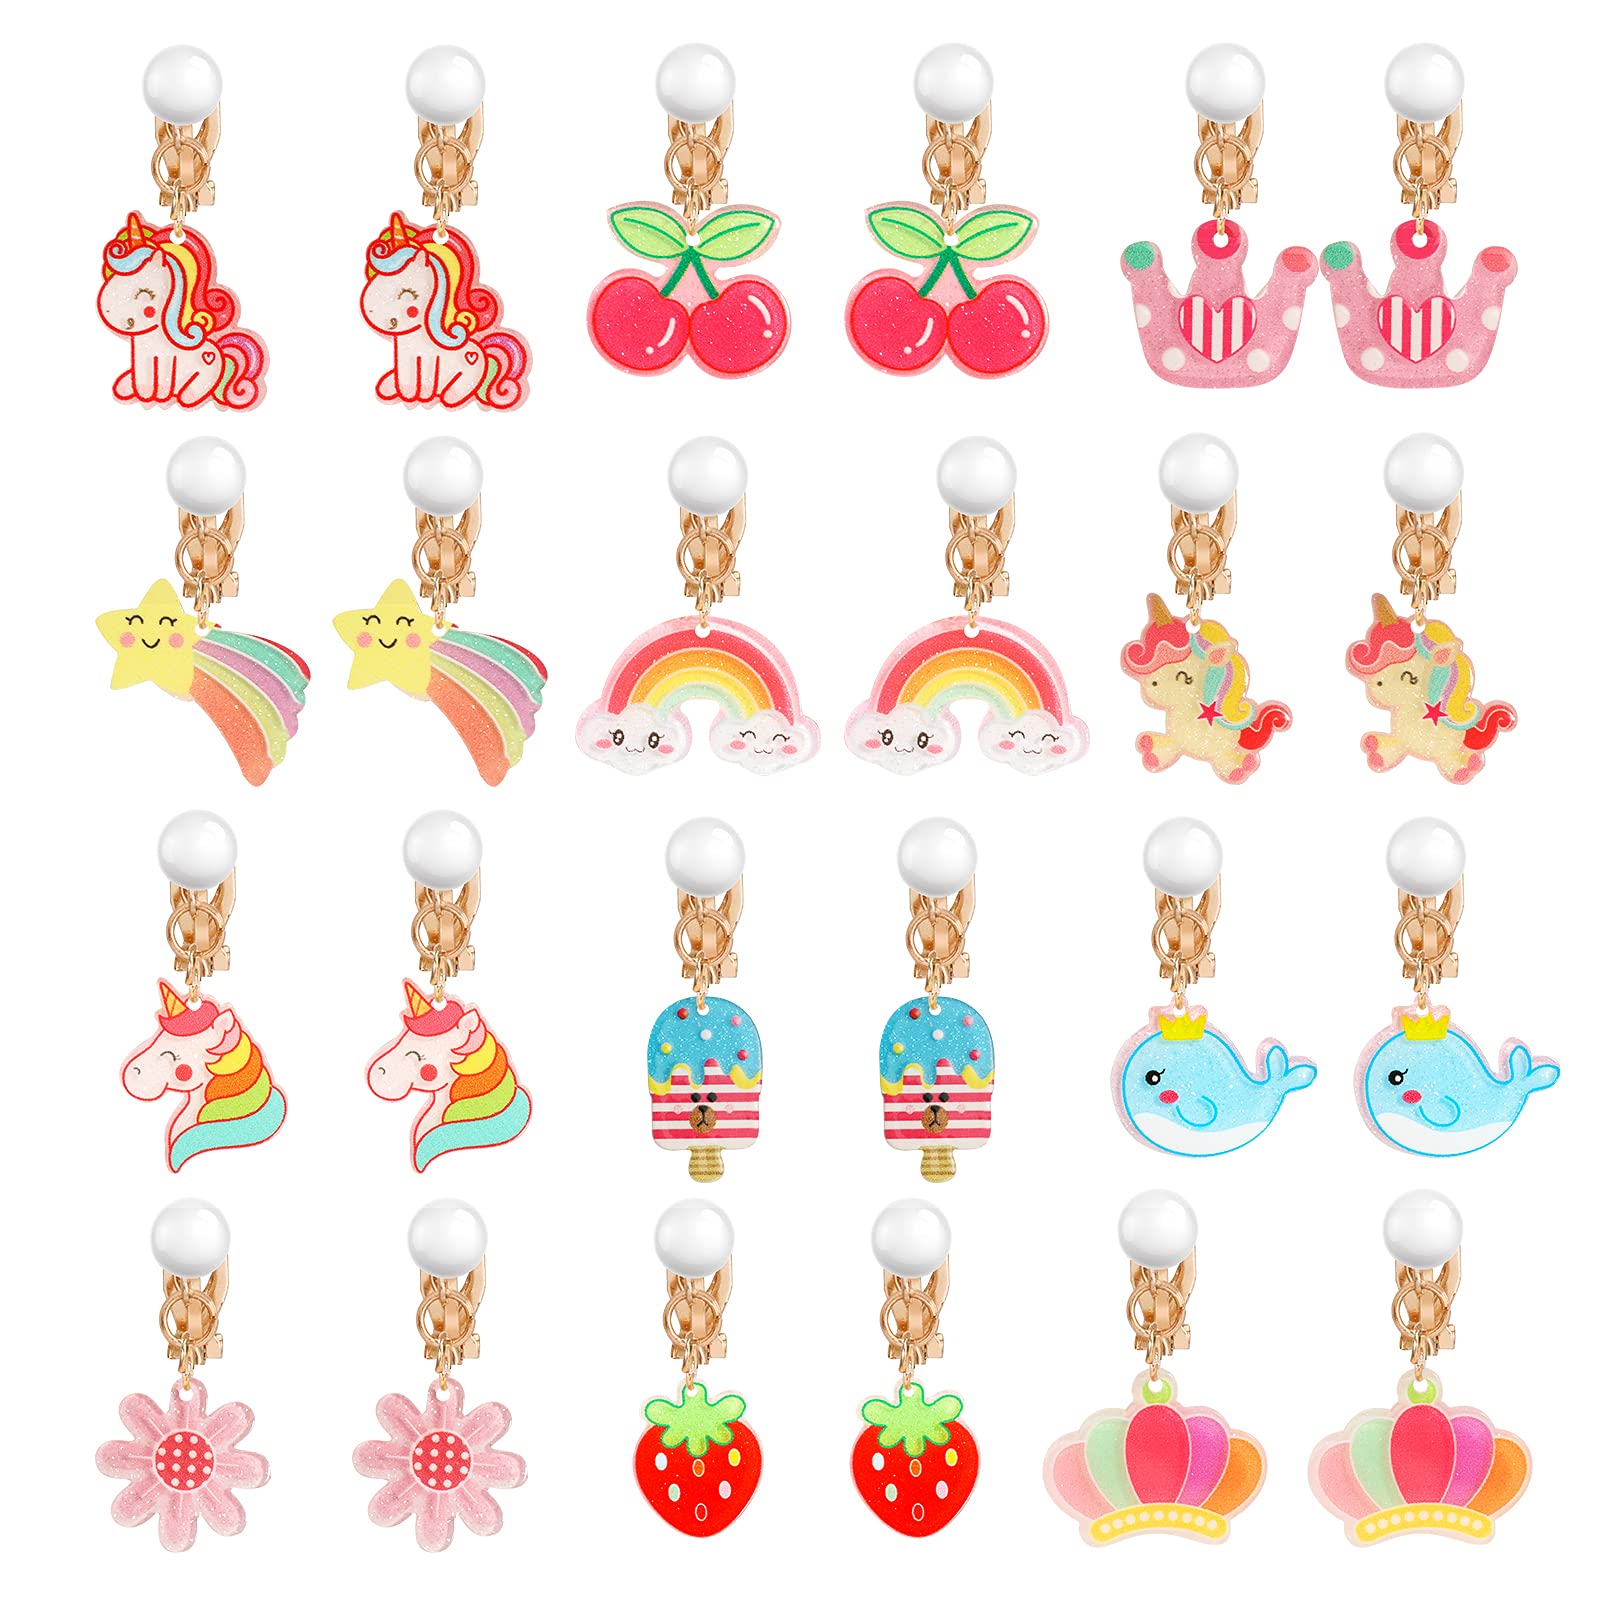 Hifot 12 Pairs Clip on Earrings Girls, Unicorn Rainbow Strawberry Flower Princess No Pierced Earrings for Kids, Party Favors Pretend Play Jewelry Accessories